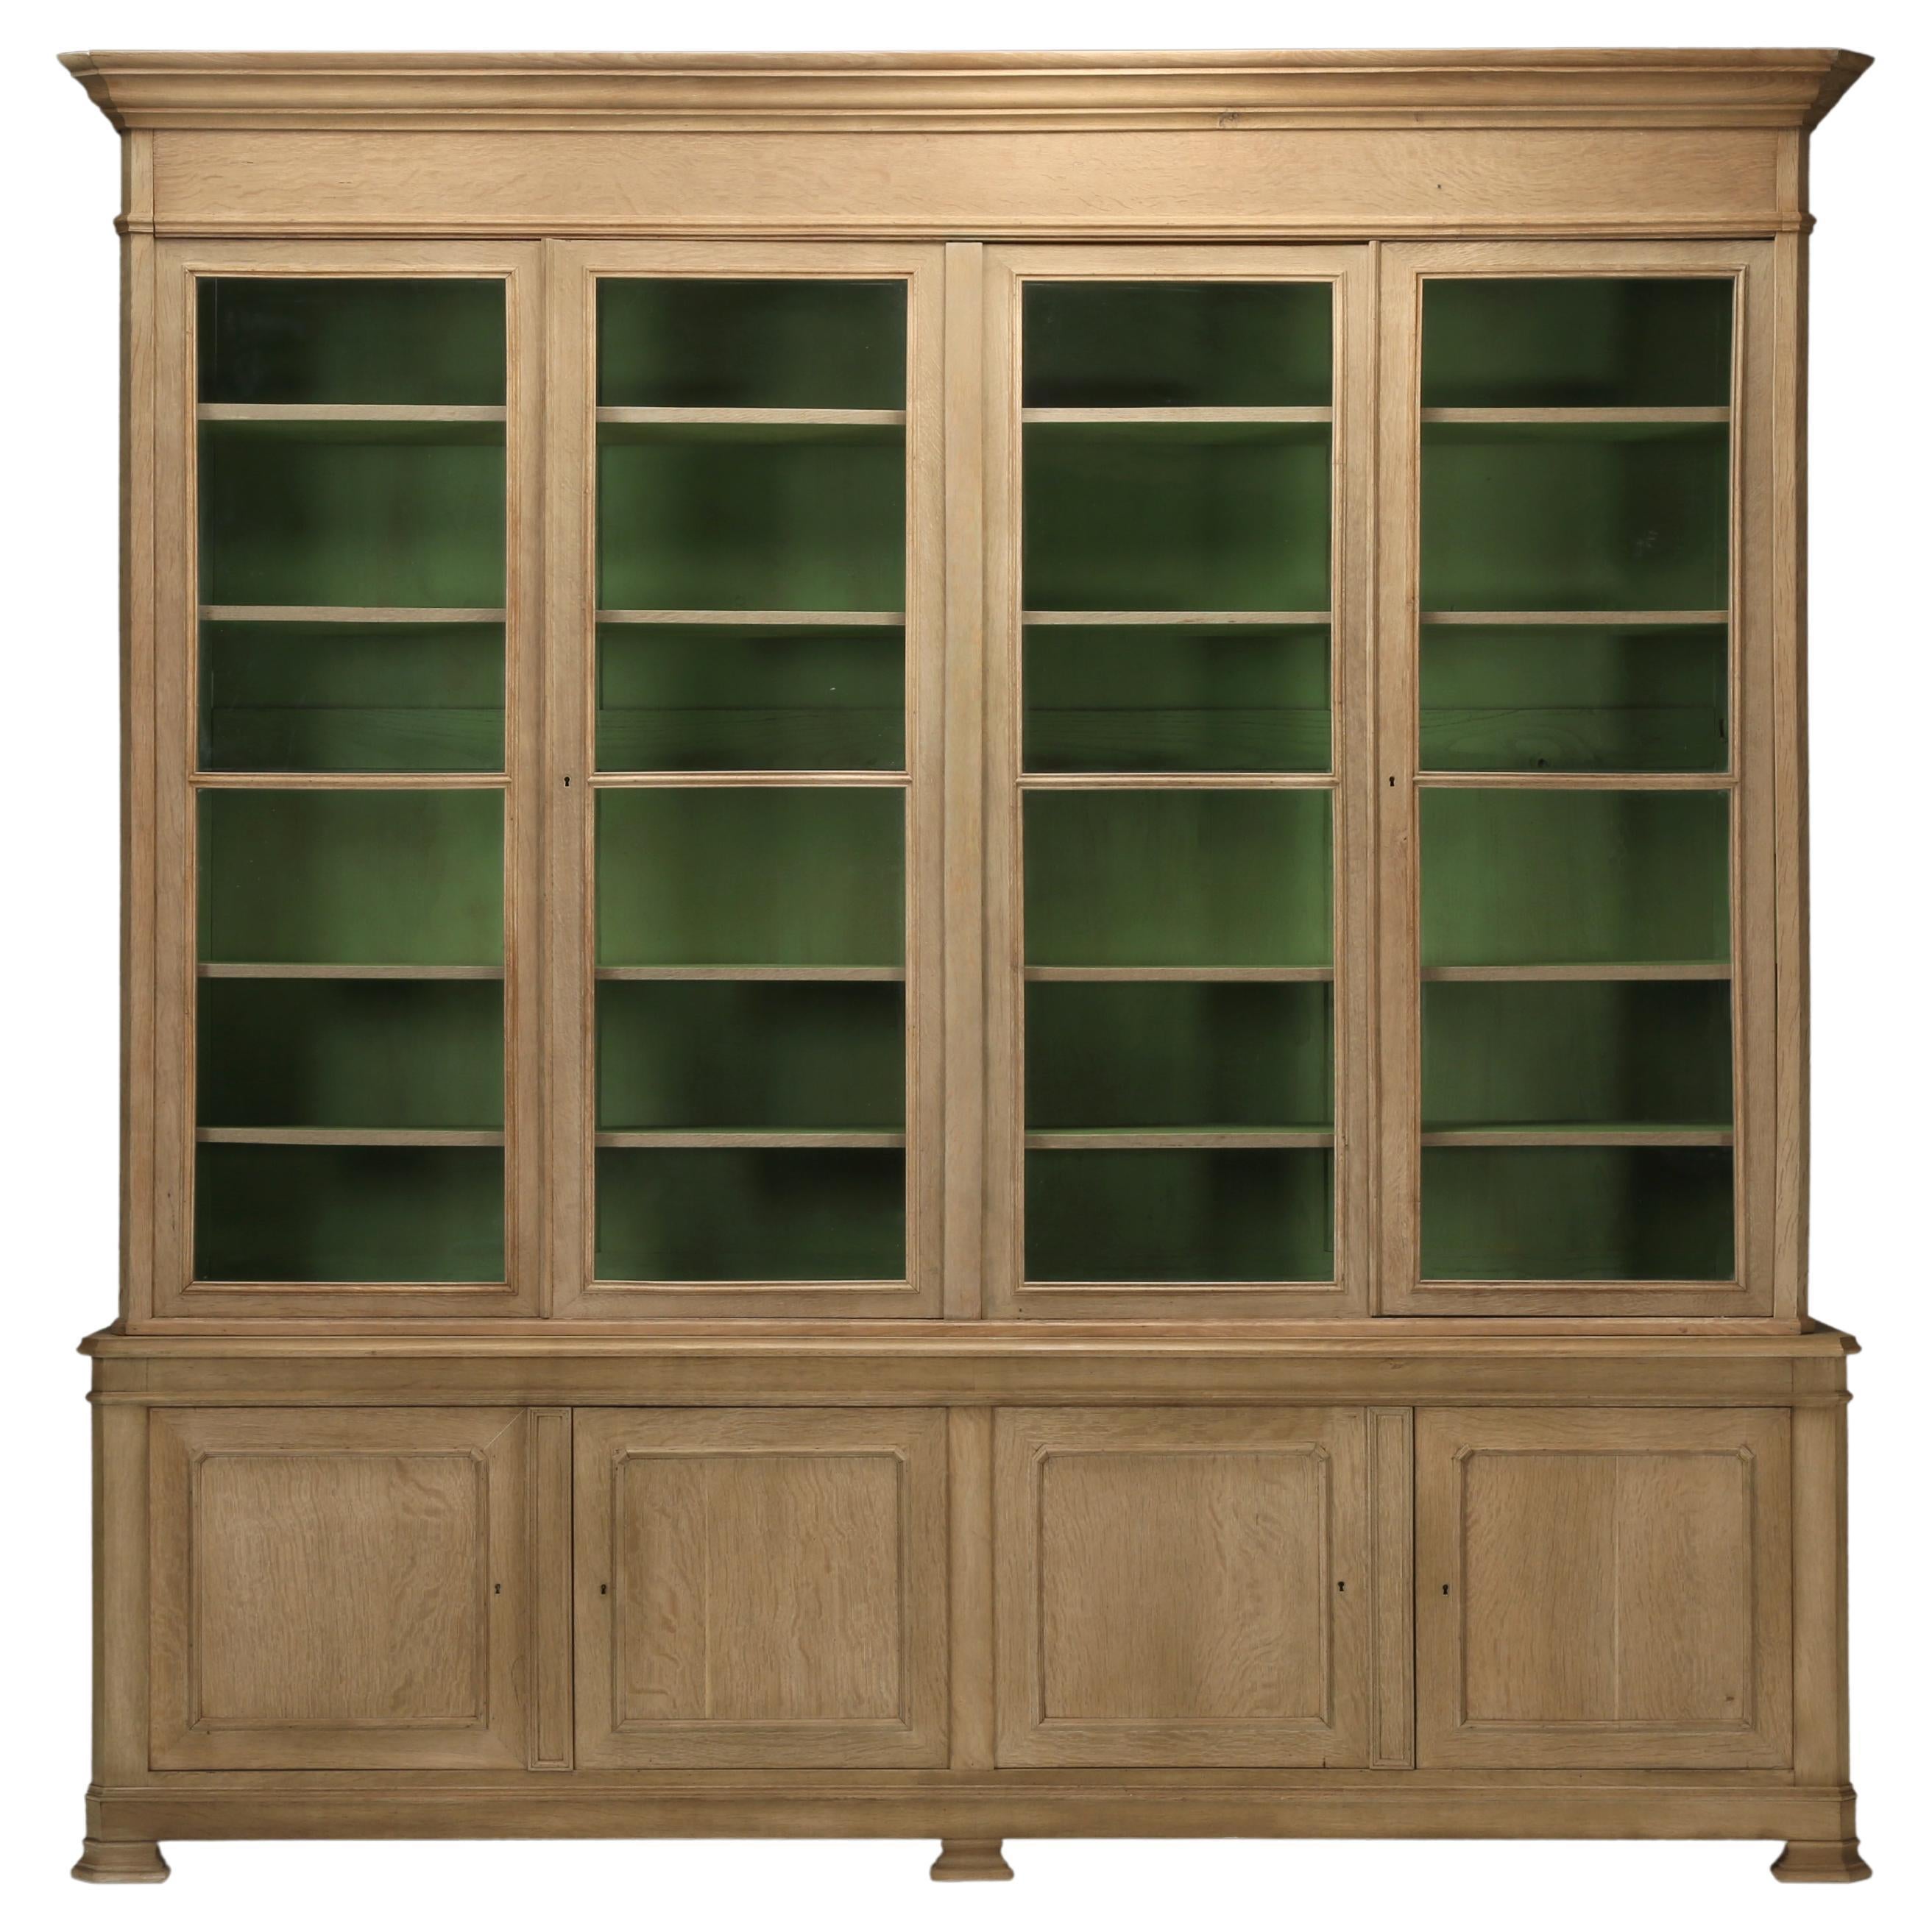 French Bookcase or Bibliothèque Louis Philippe Washed Oak Original Glass, c1800s